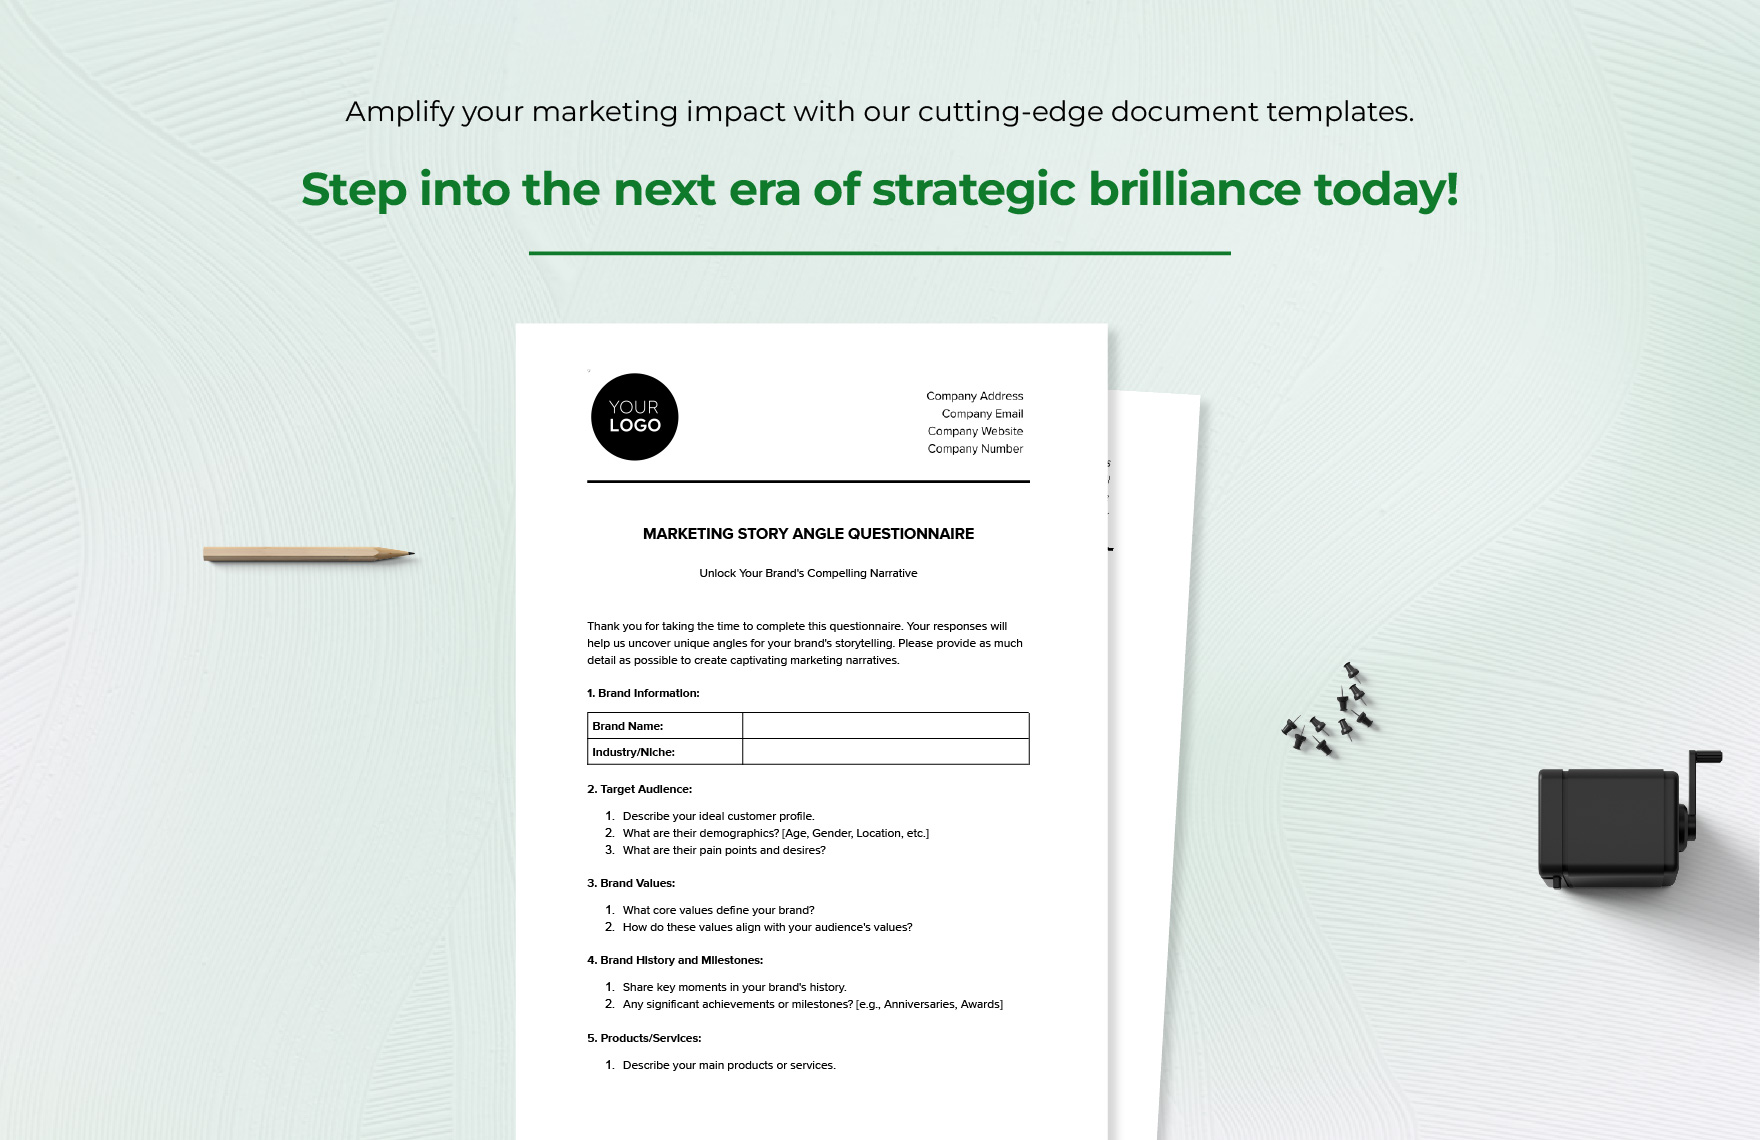 Marketing Story Angle Questionnaire Template